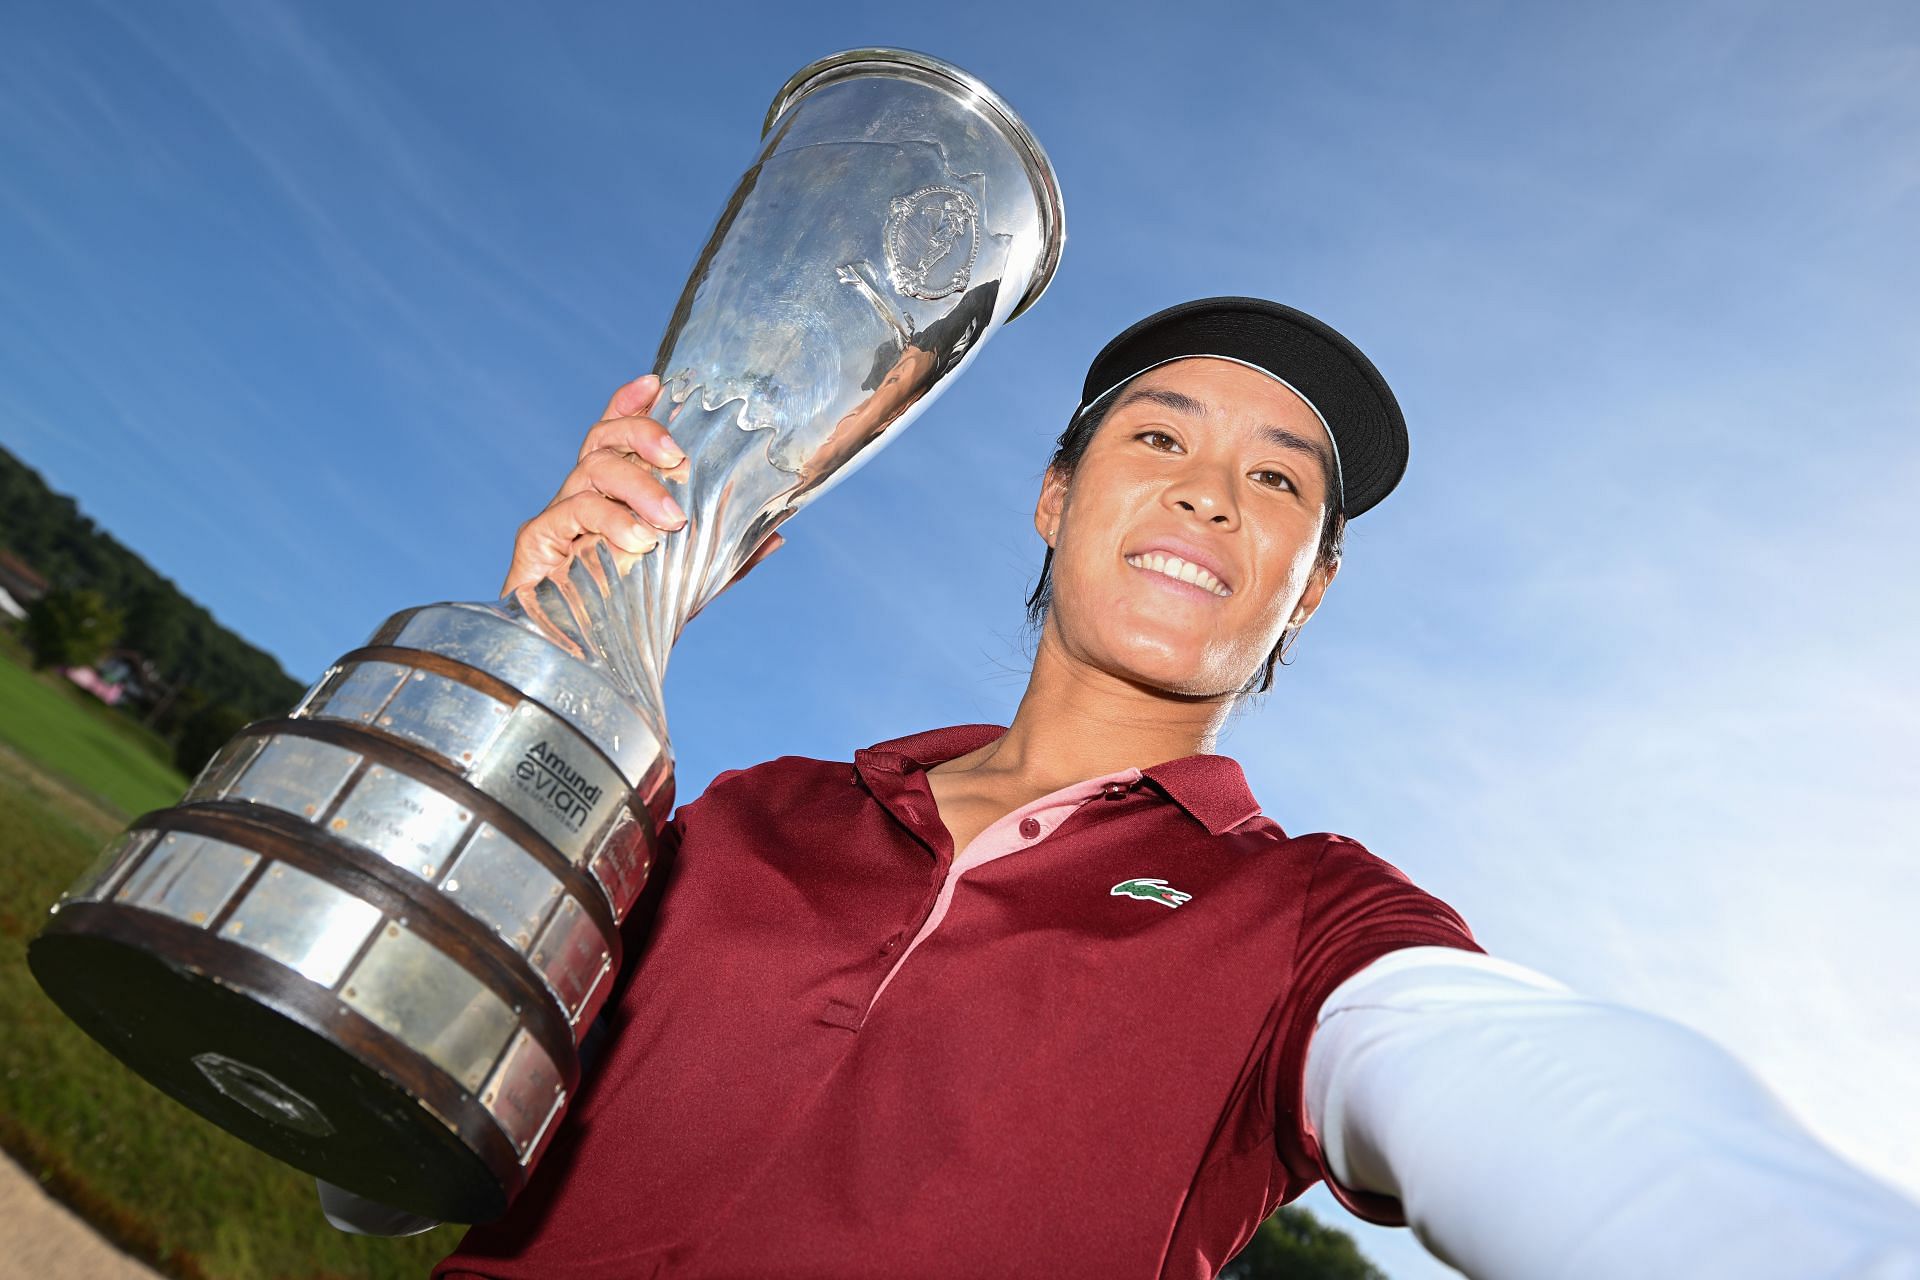 Celine Boutier with the Evian Championship trophy (via Getty Images)